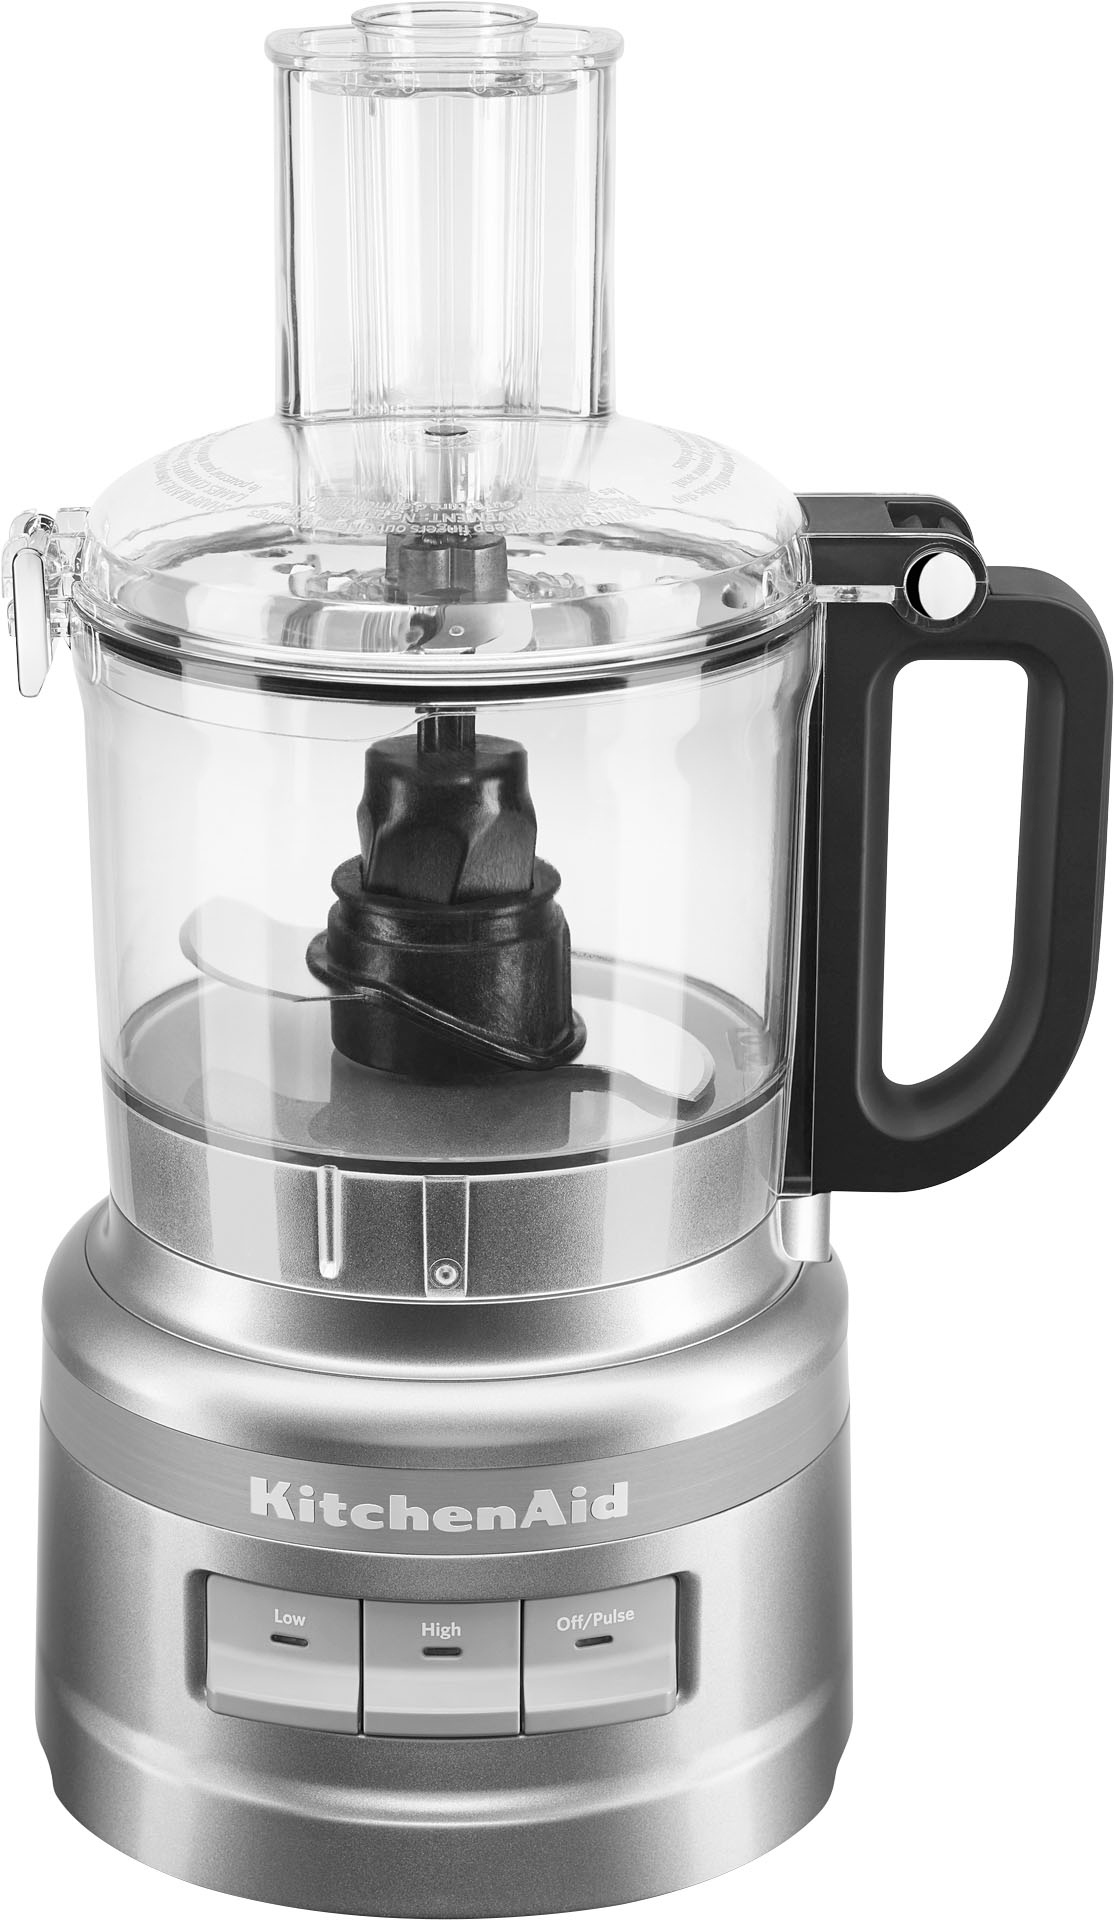 7 cup work bowl for kitchenaid food processor